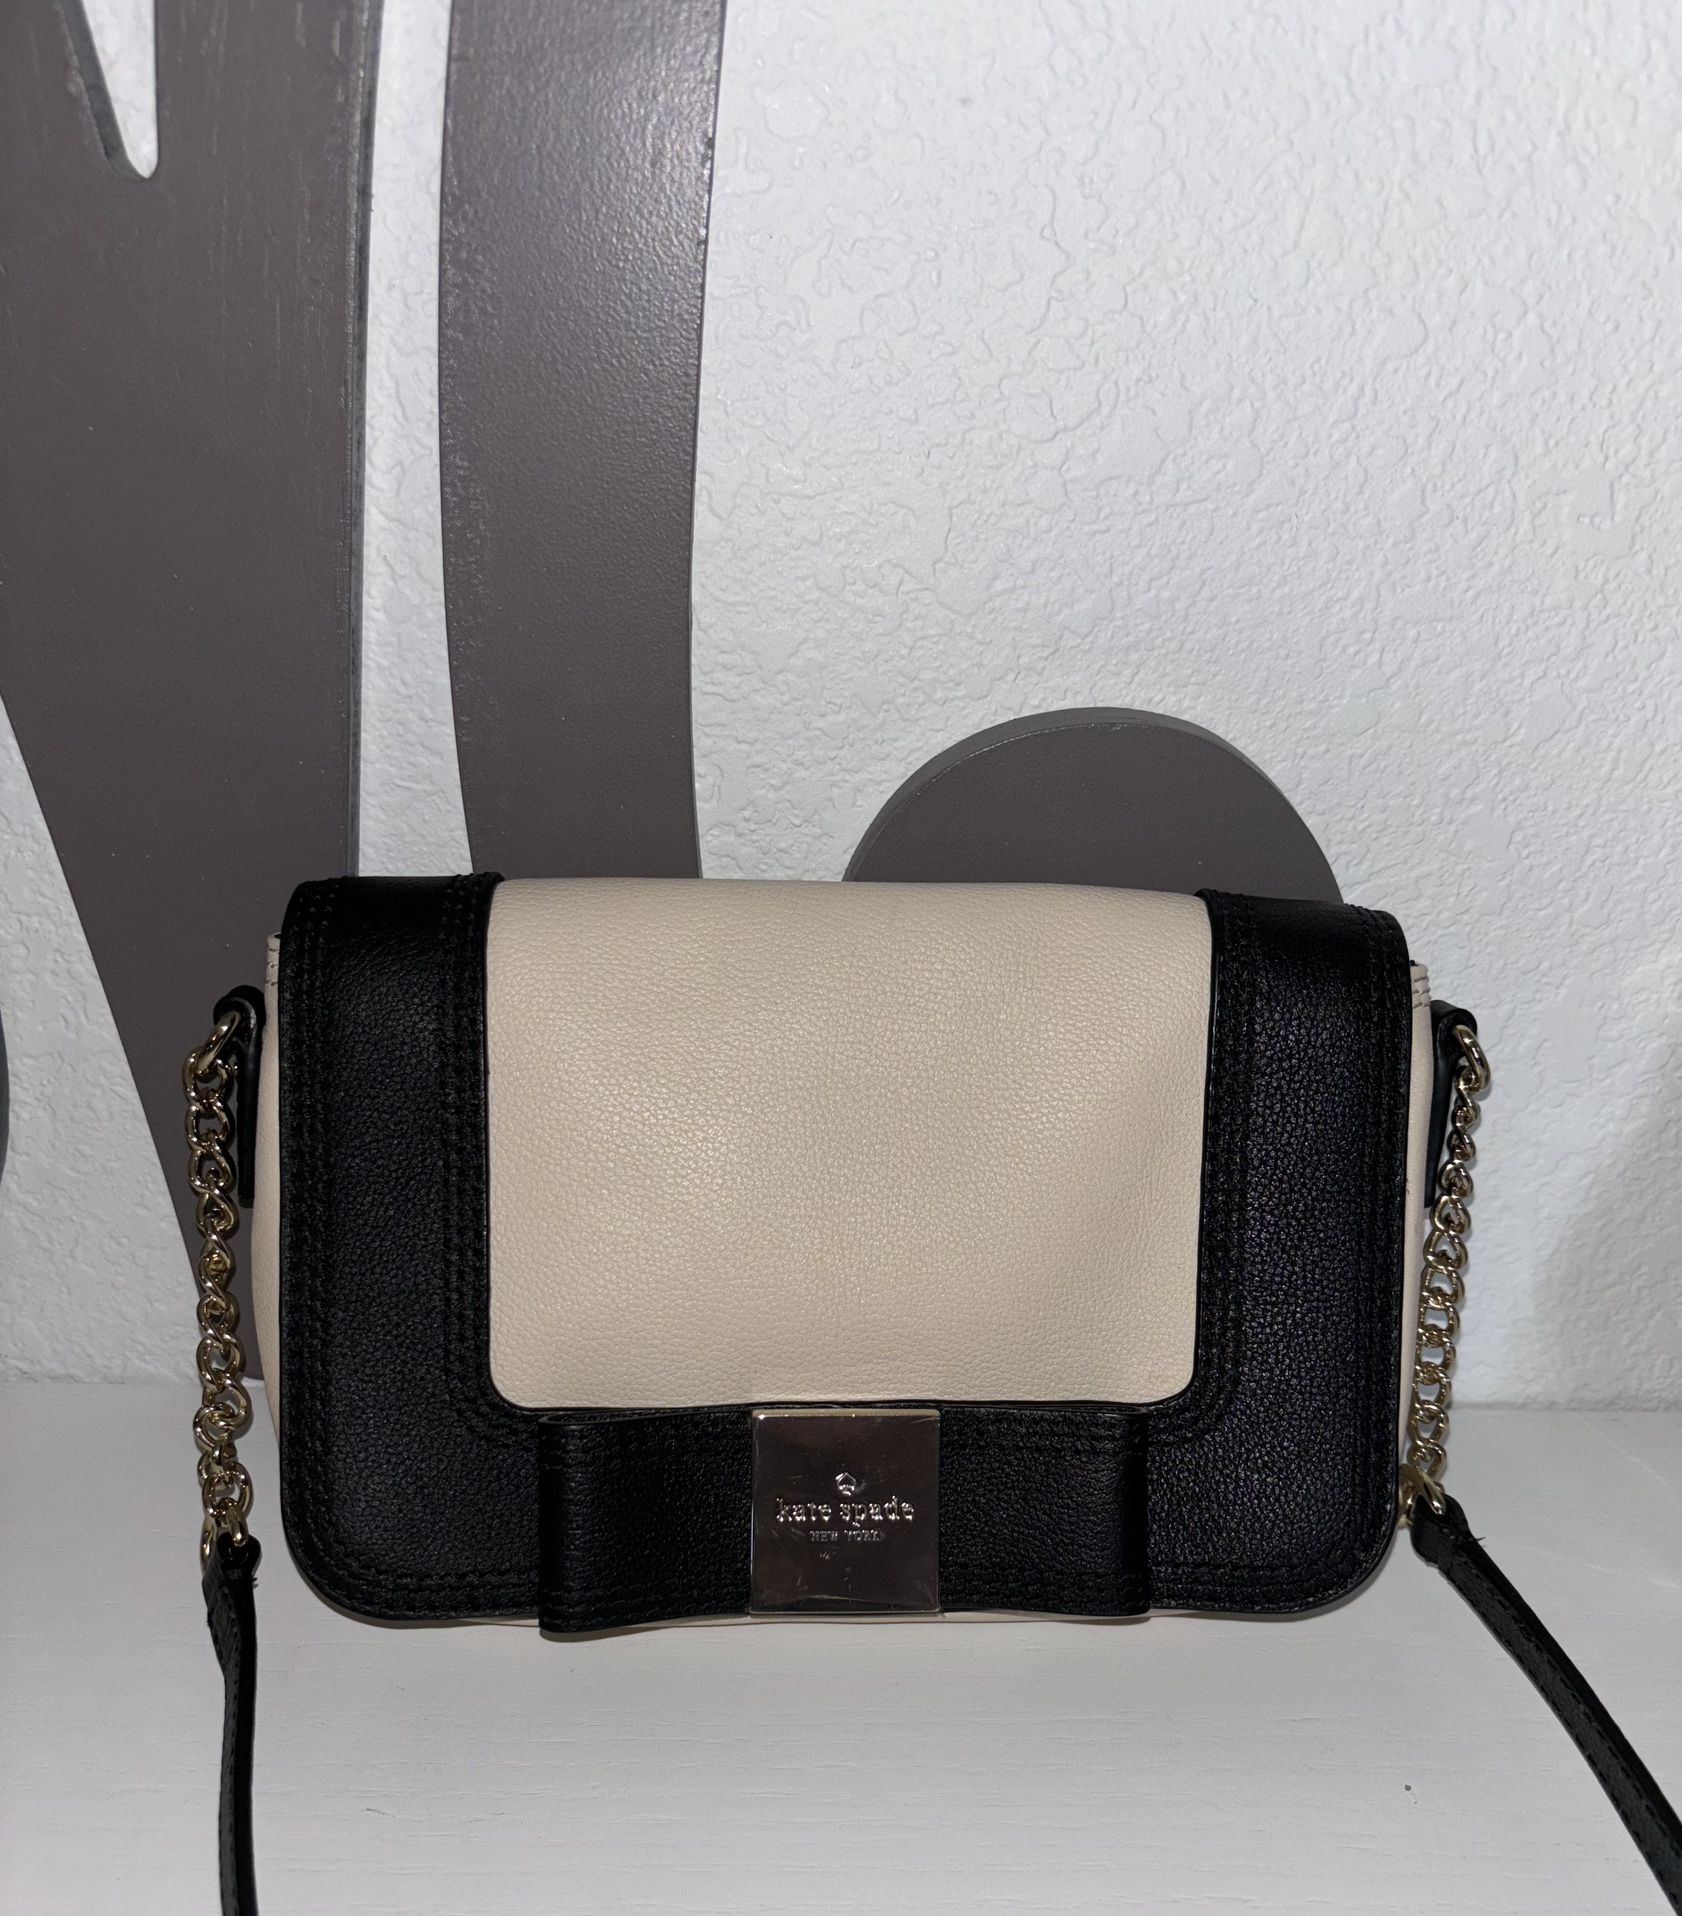 *KATE SPADE* Leather 2 Tone Front Bow Flap Crossbody Bag Purse